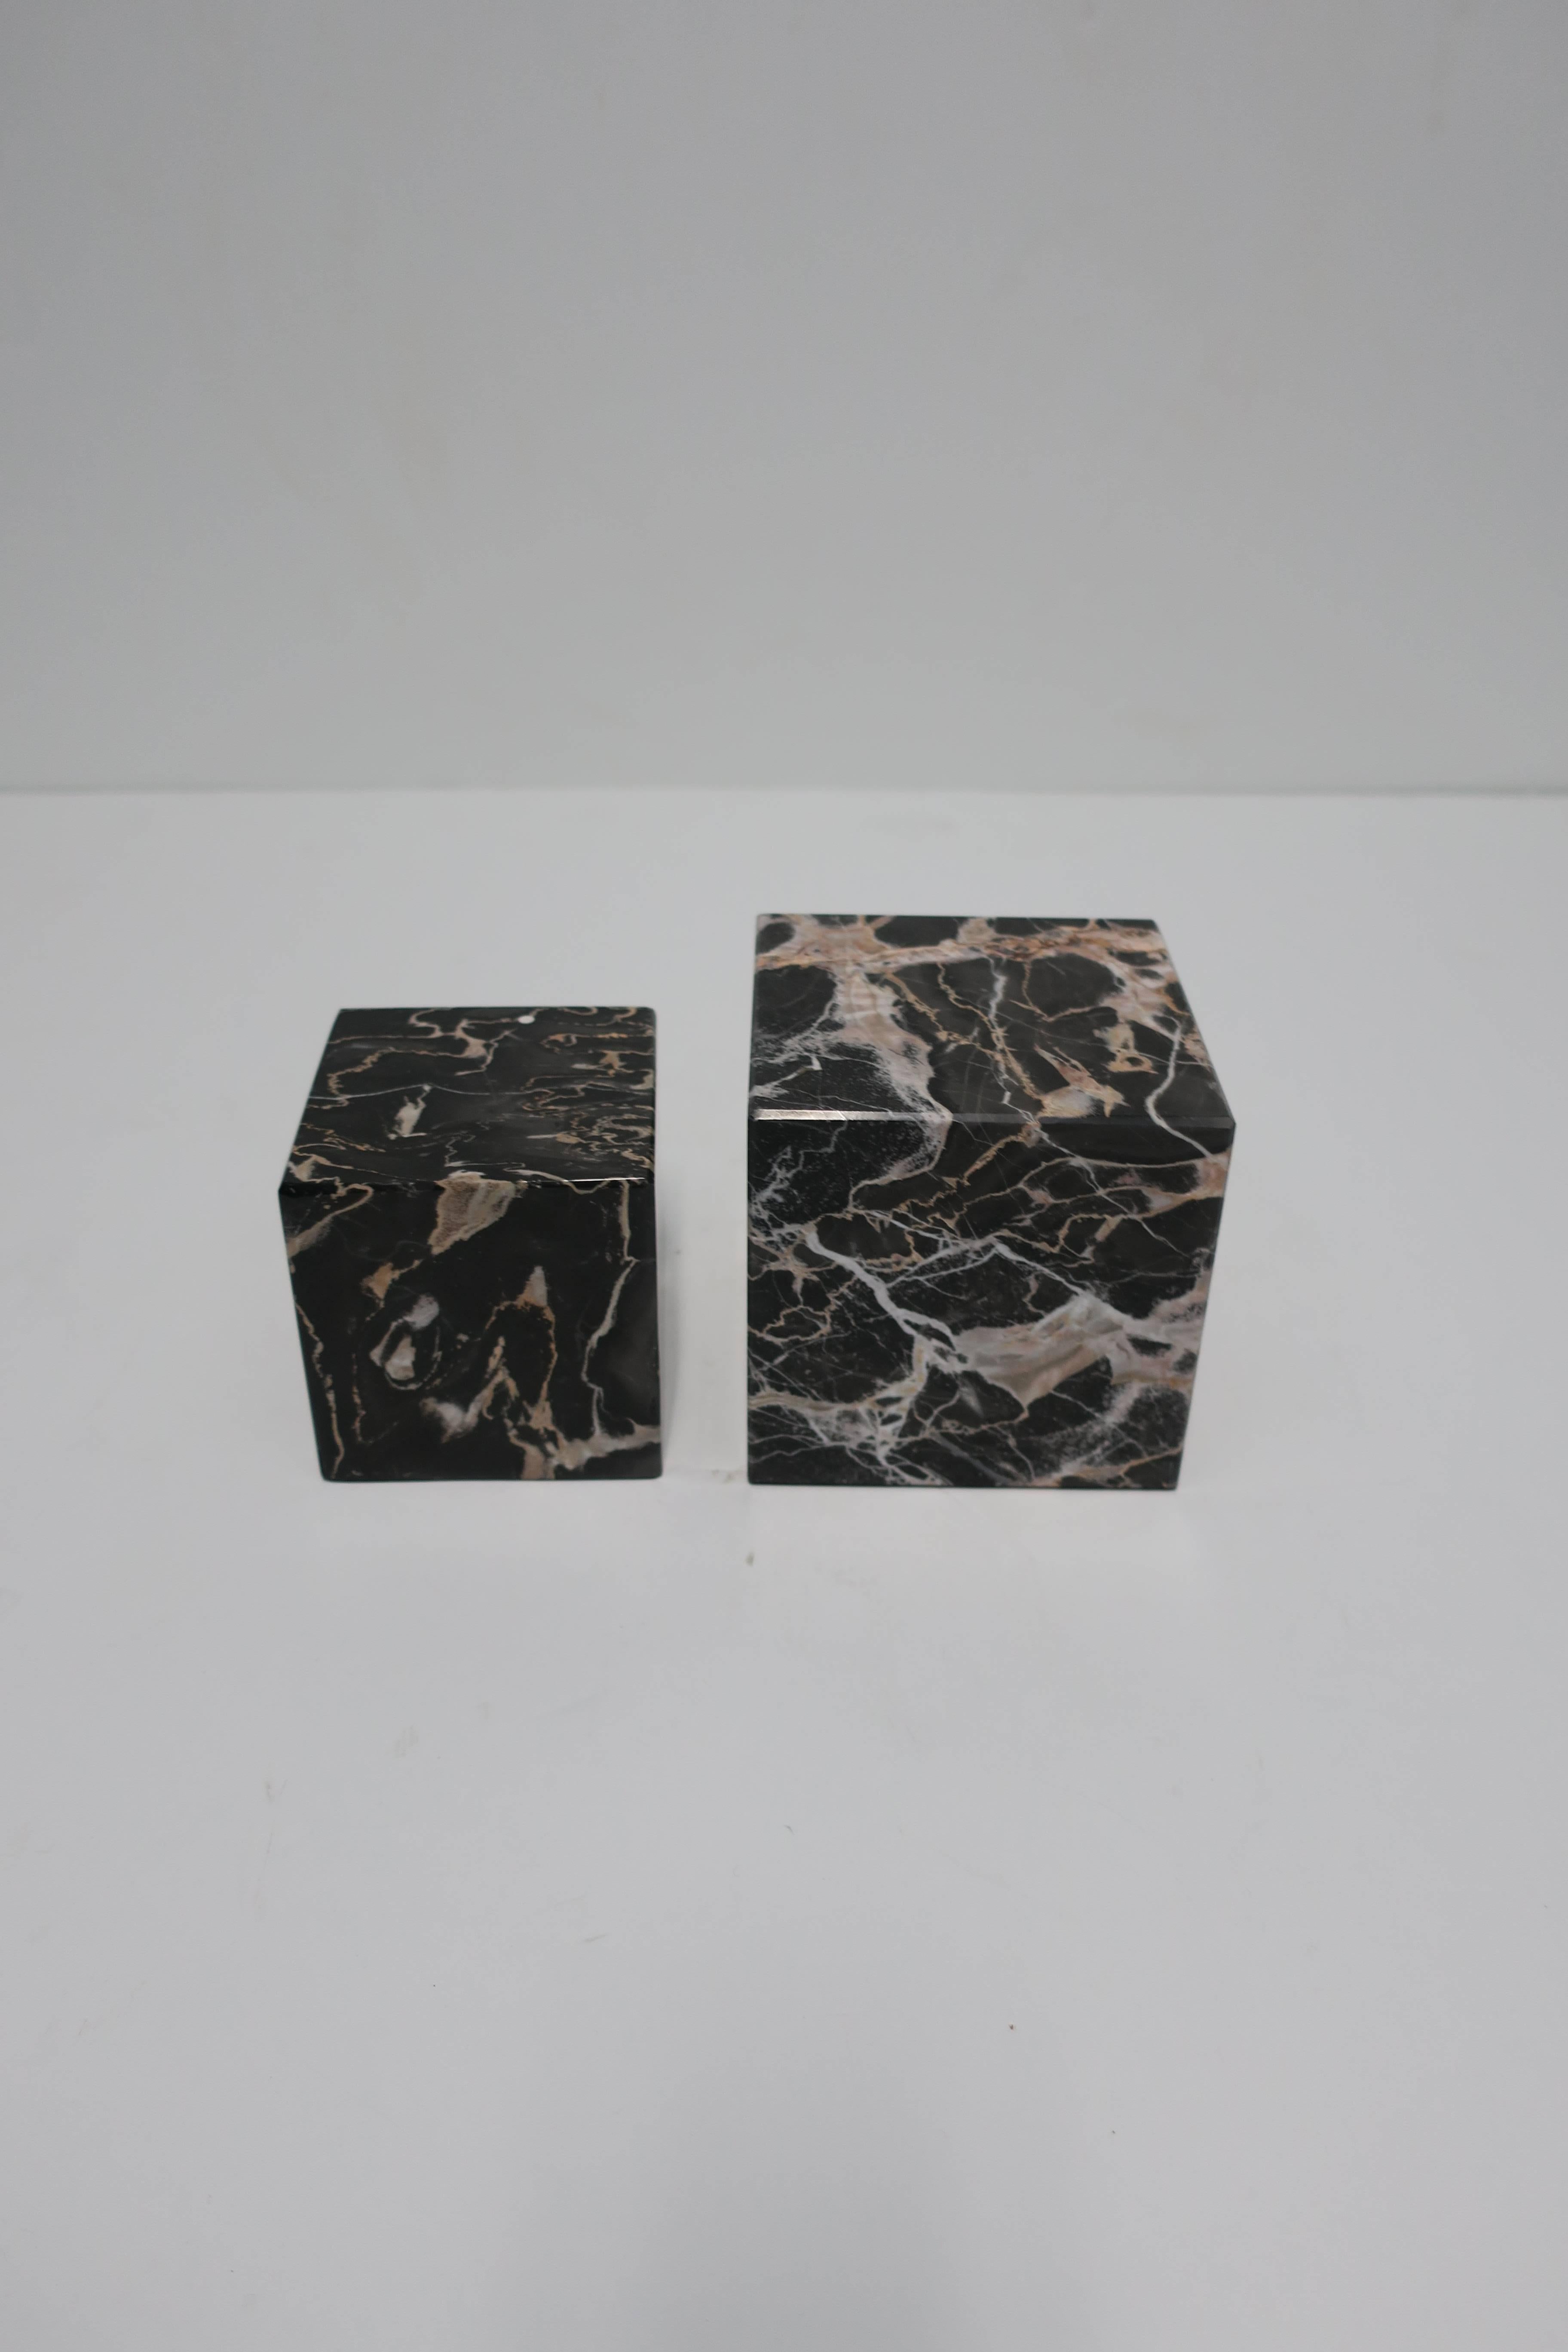 A pair of vintage black, white and rose colored marble bookends or display pedestals. Measurements: 3.25